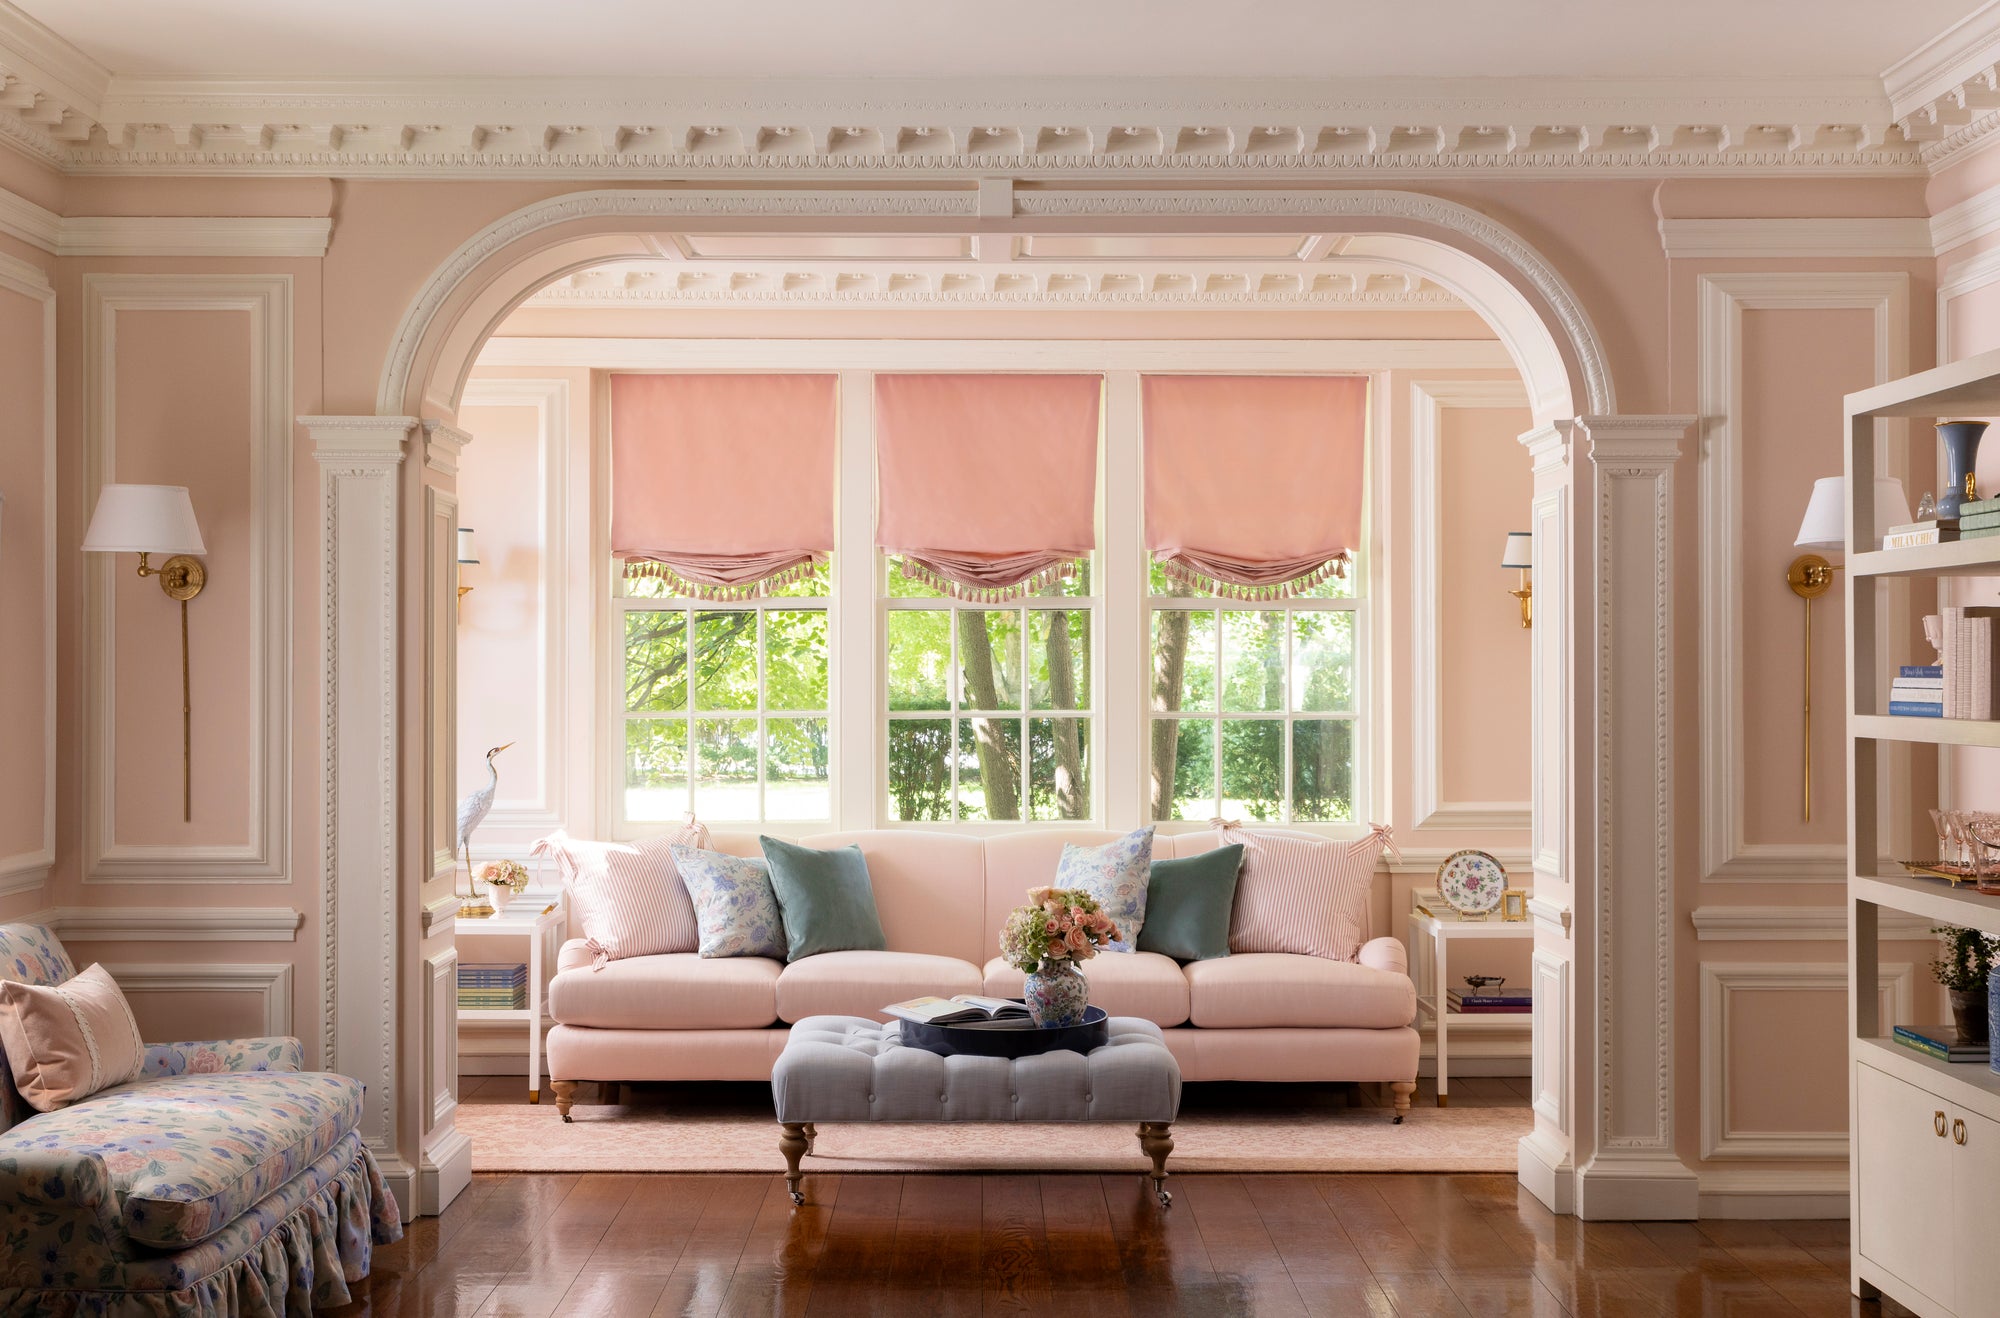 House Beautiful - This Elegant Living Room Was Inspired by Downton Abbey